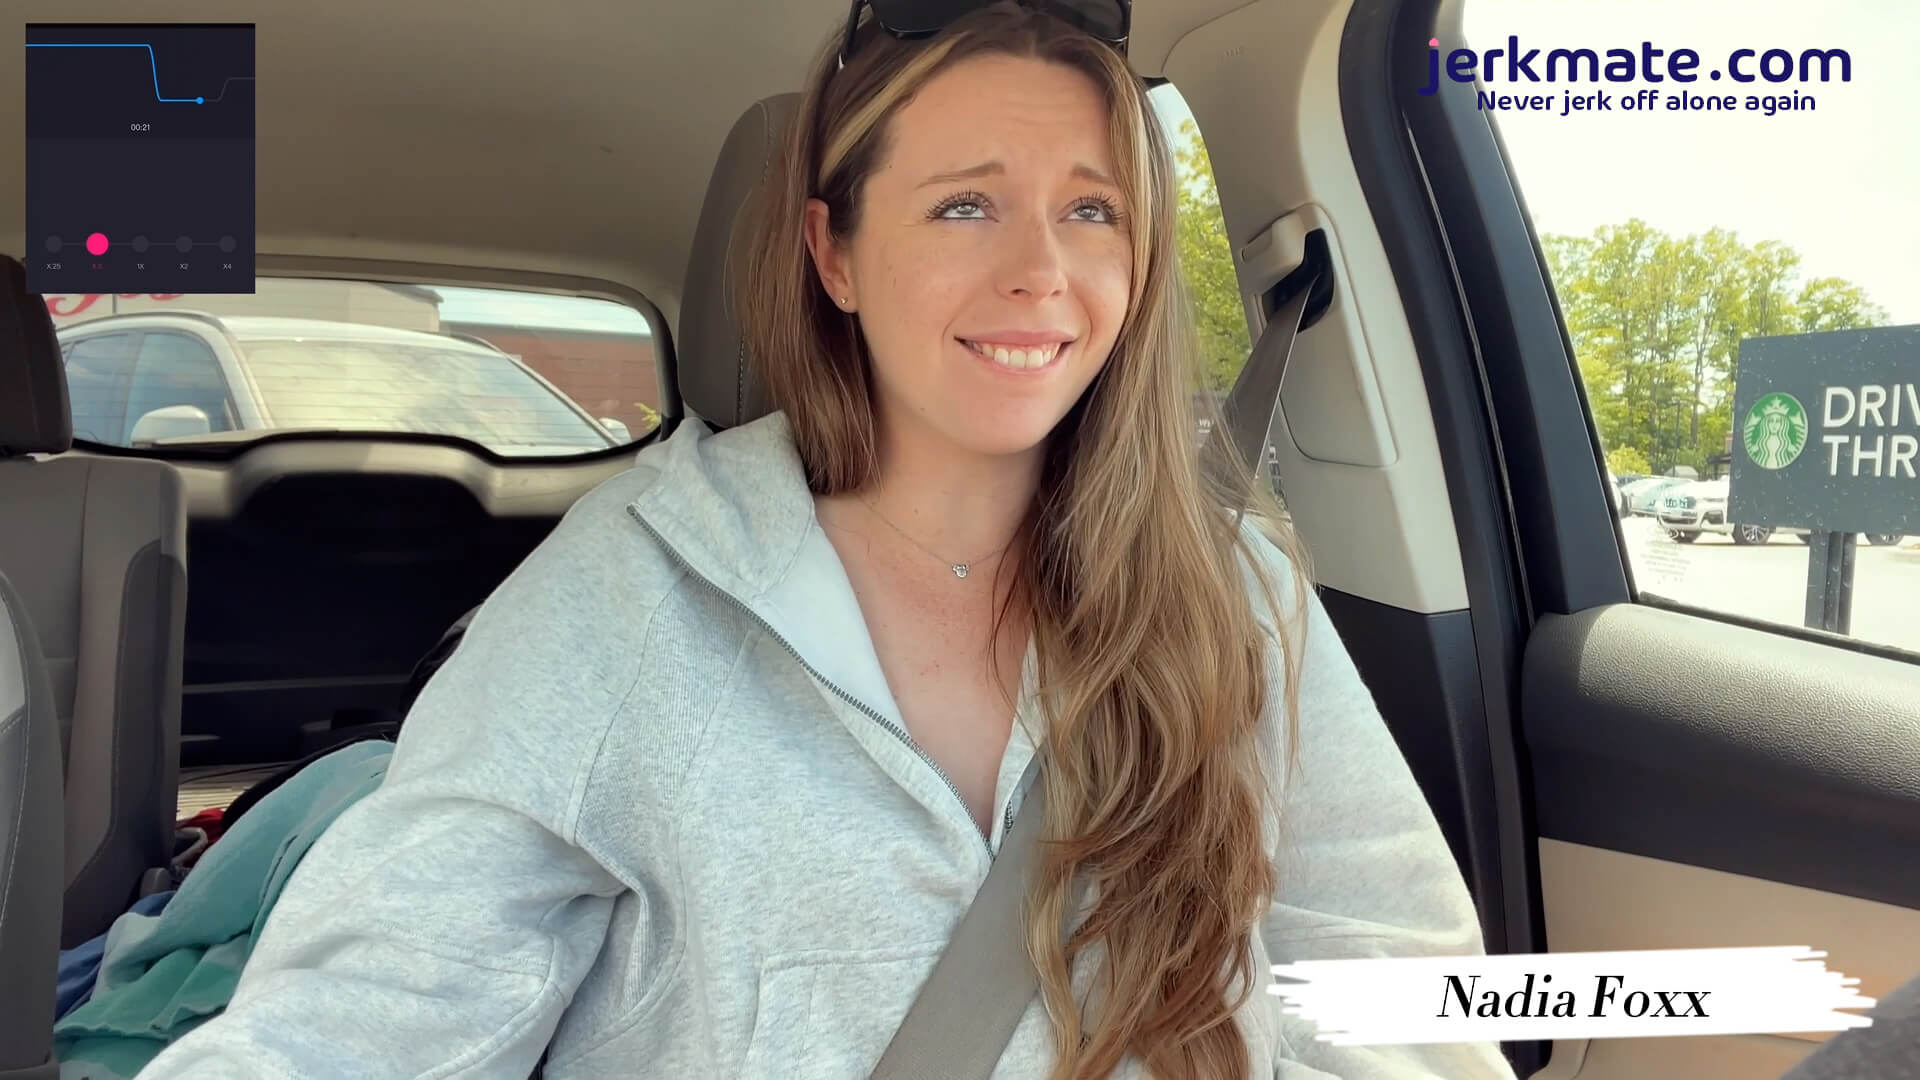 Nadiafoxx is all about being risky when it comes to giving herself pleasure. Watch her go through a drive-thru with a Lovense toy making her shake from pleasure.